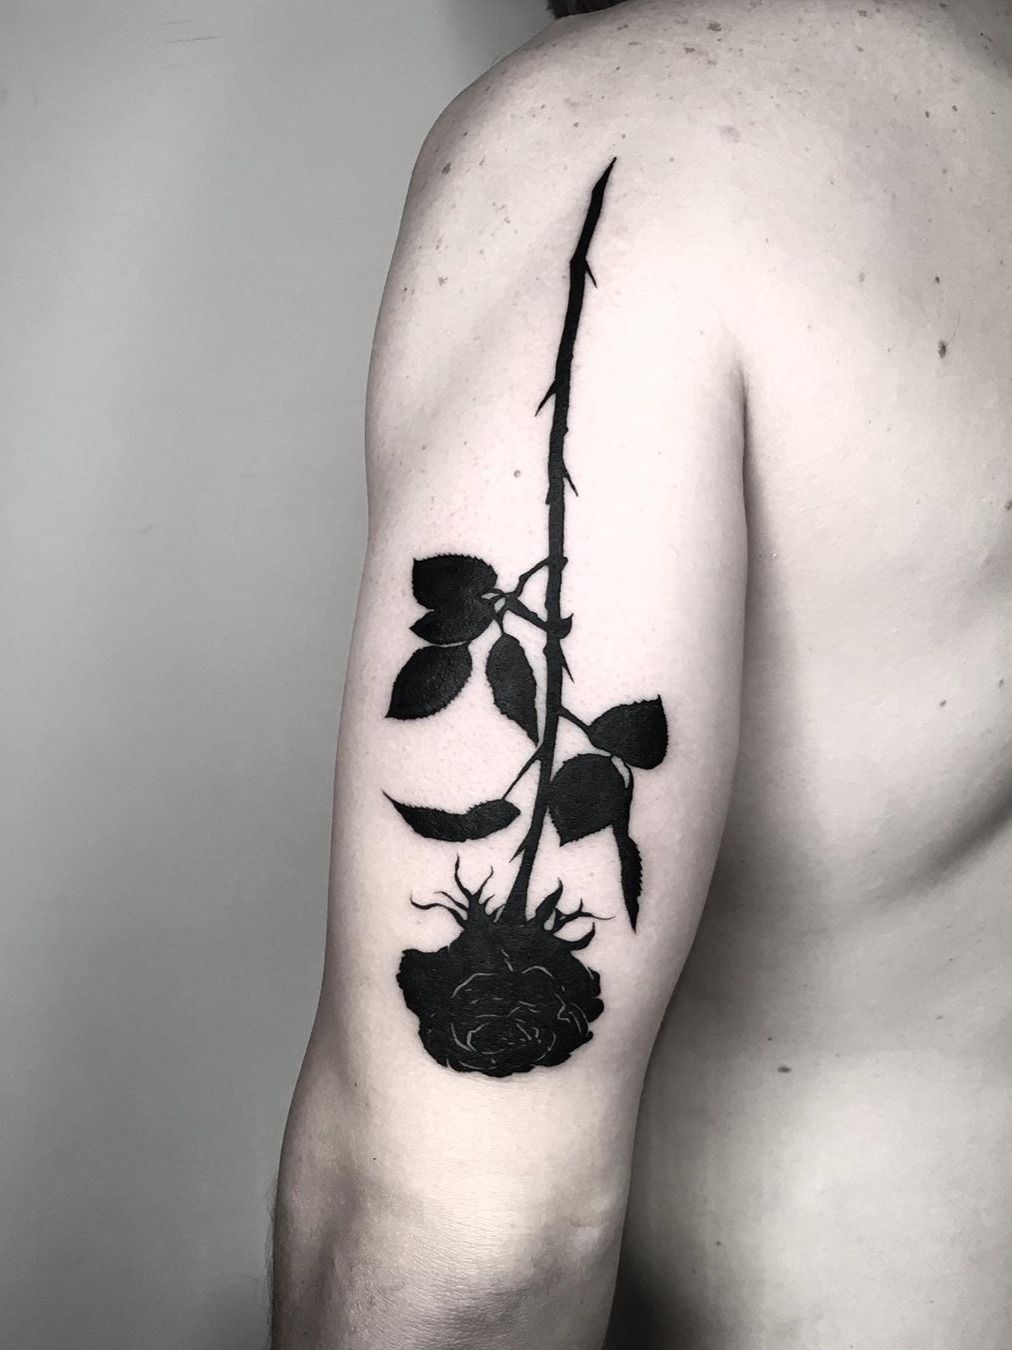 30 Alluring Black Rose Tattoo Ideas for Men & Women to Inspire You in 2023